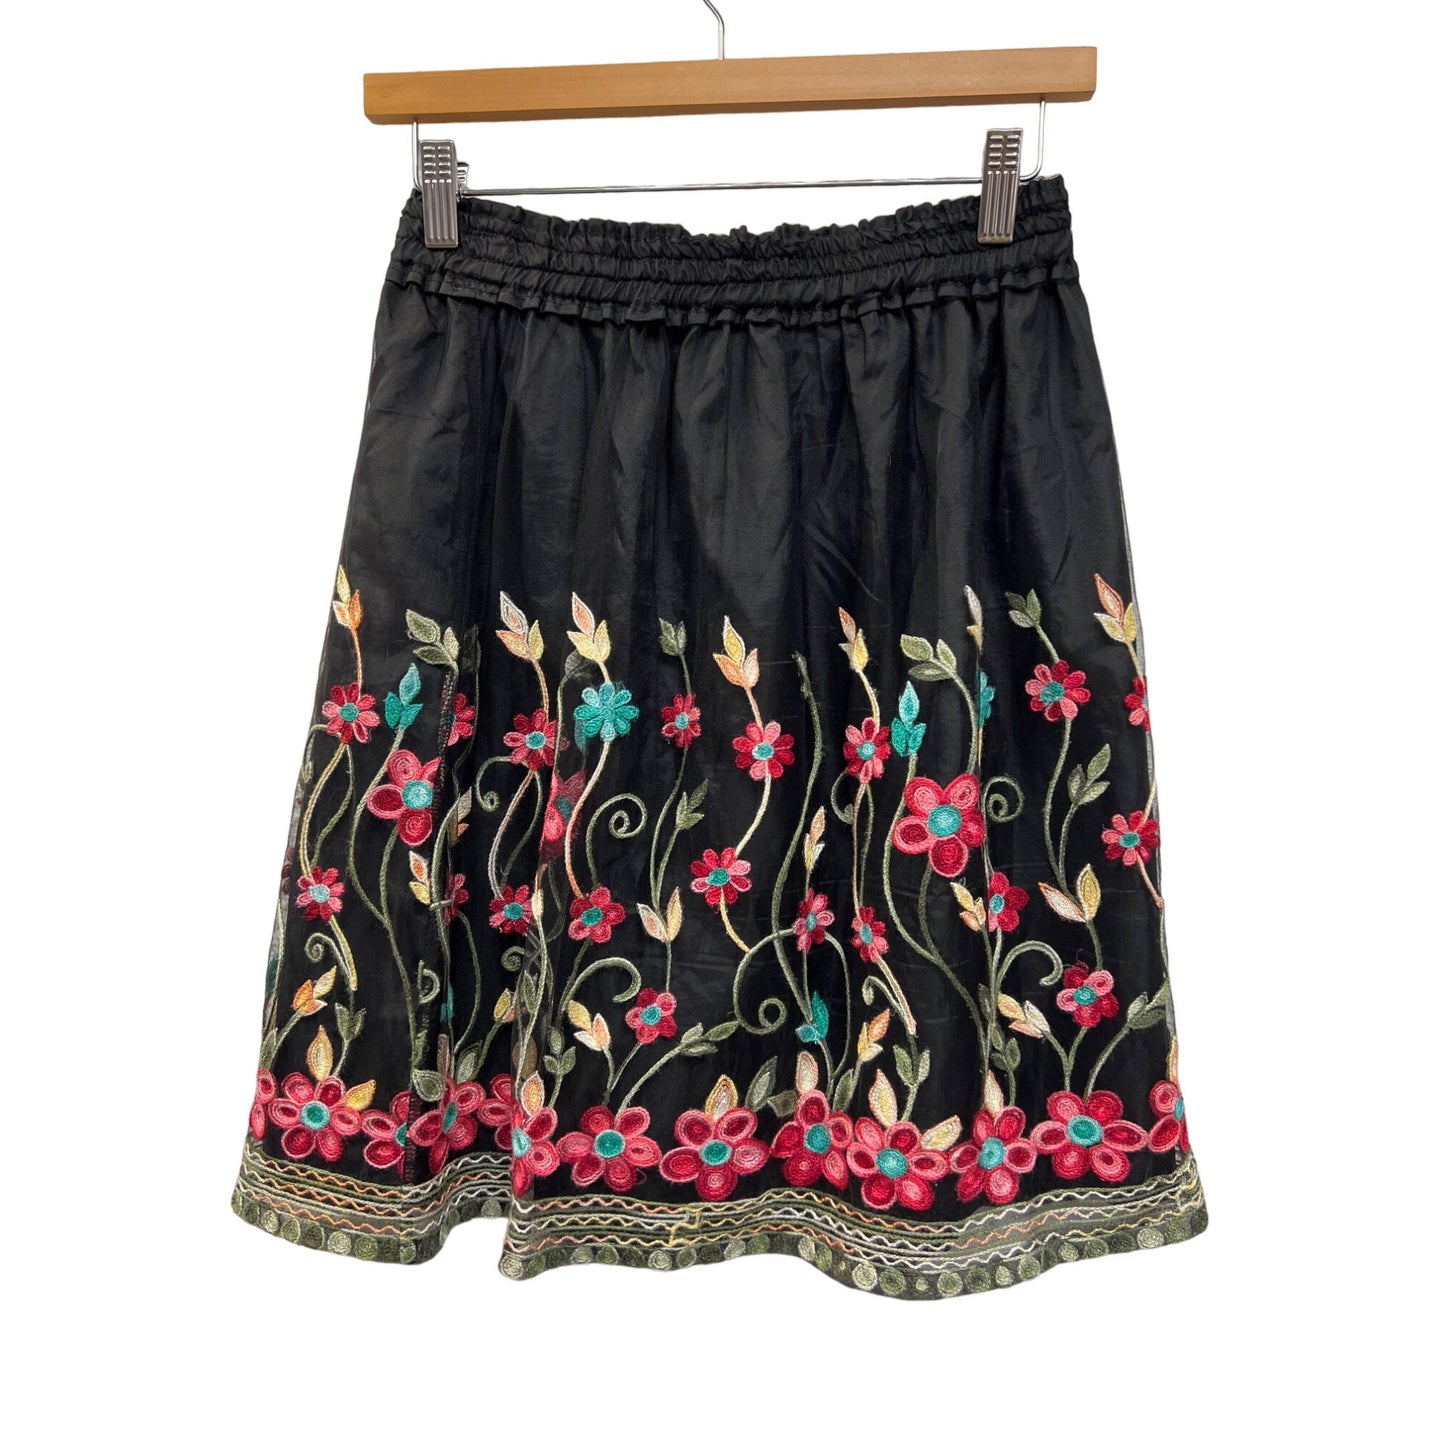 August Silk Black Sheer Overlay with Embroidered Floral Skirt